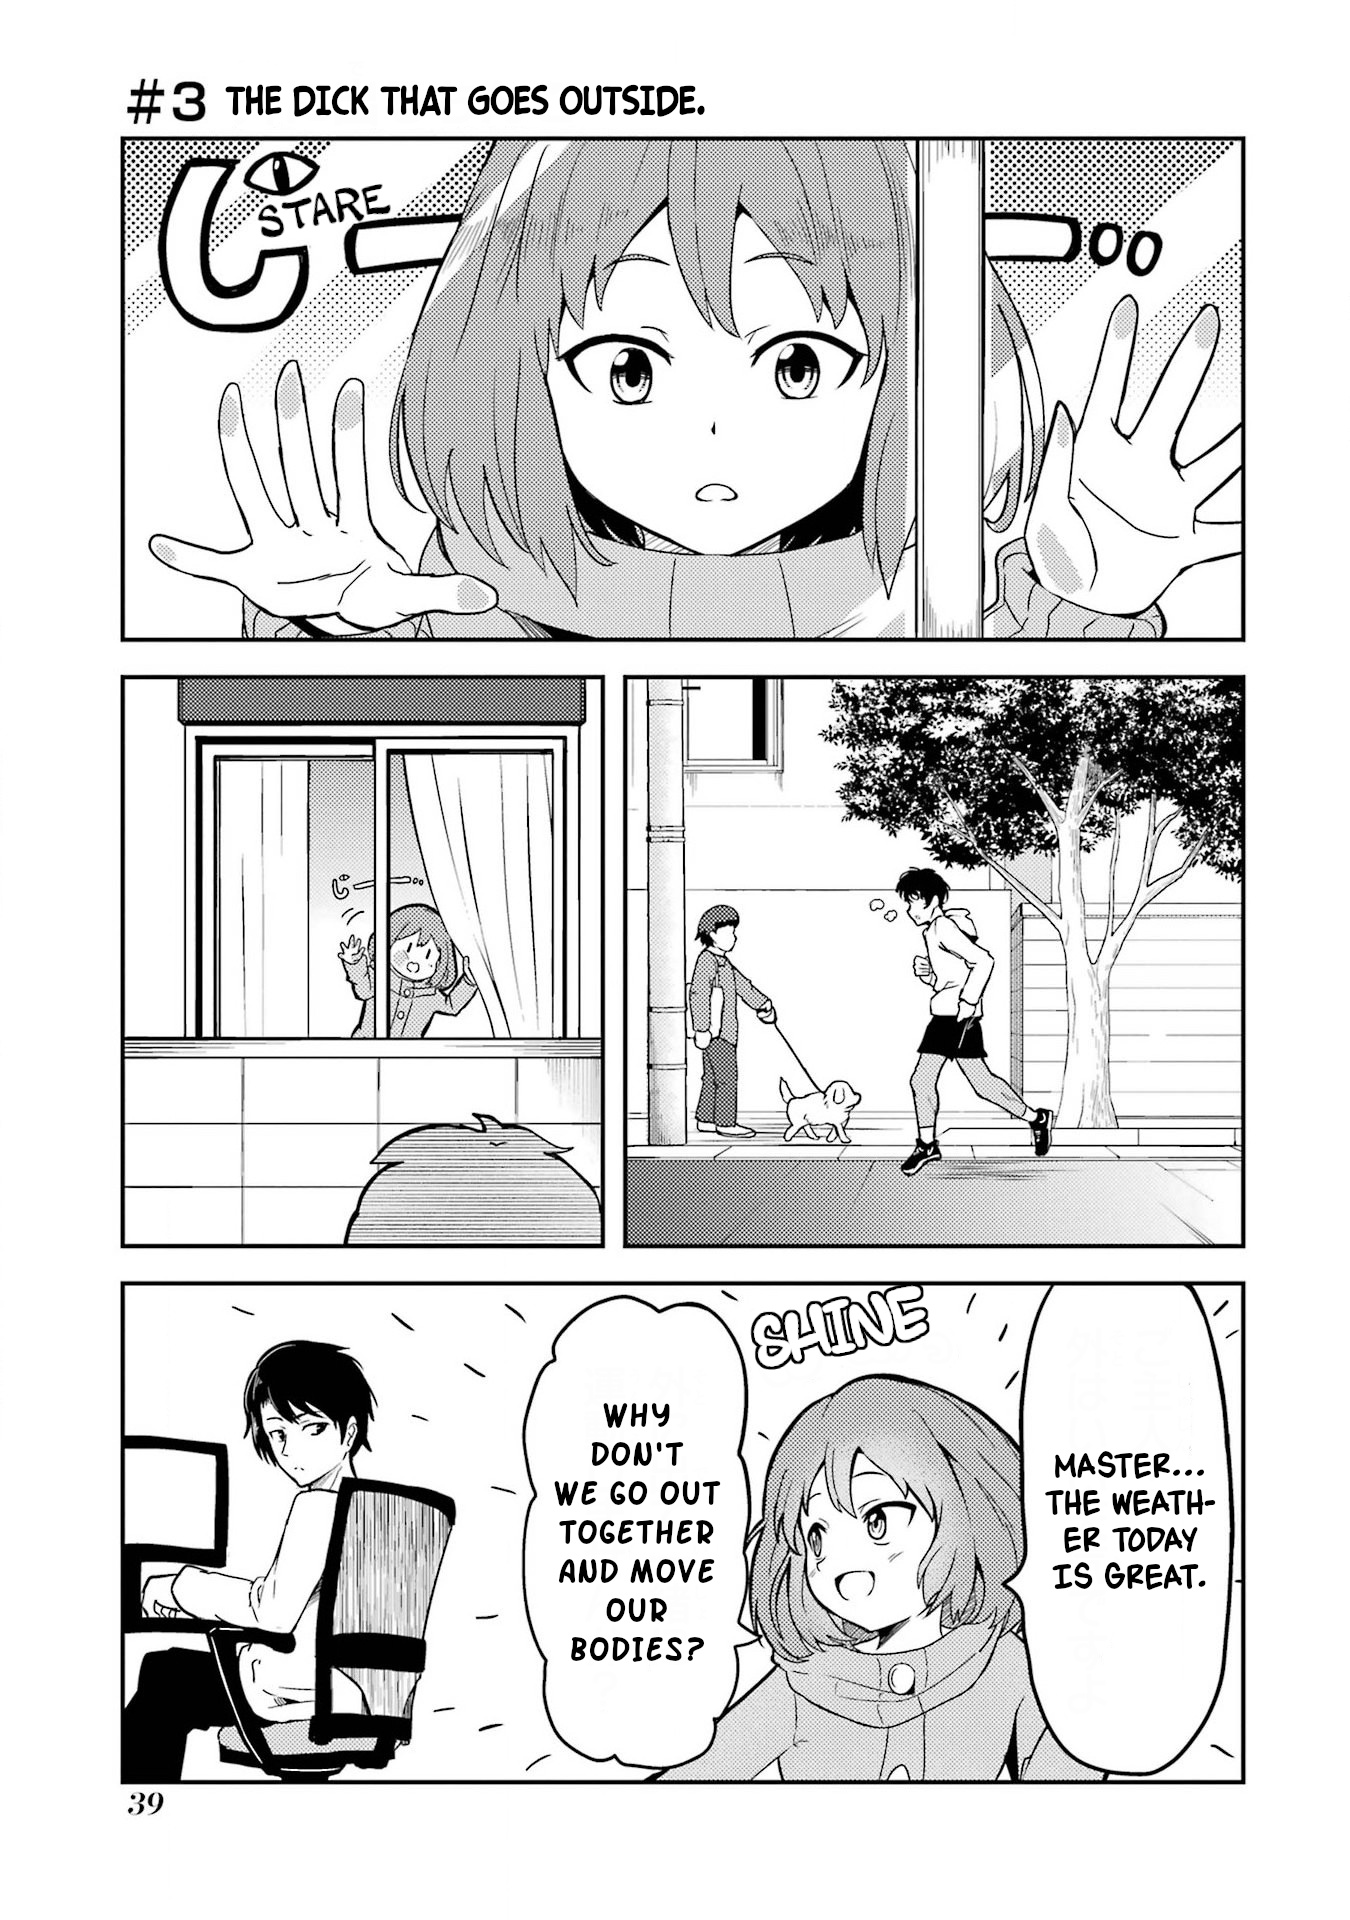 Turns Out My Dick Was A Cute Girl Vol.1 Chapter 3: The Dick That Goes Outside. - Picture 1